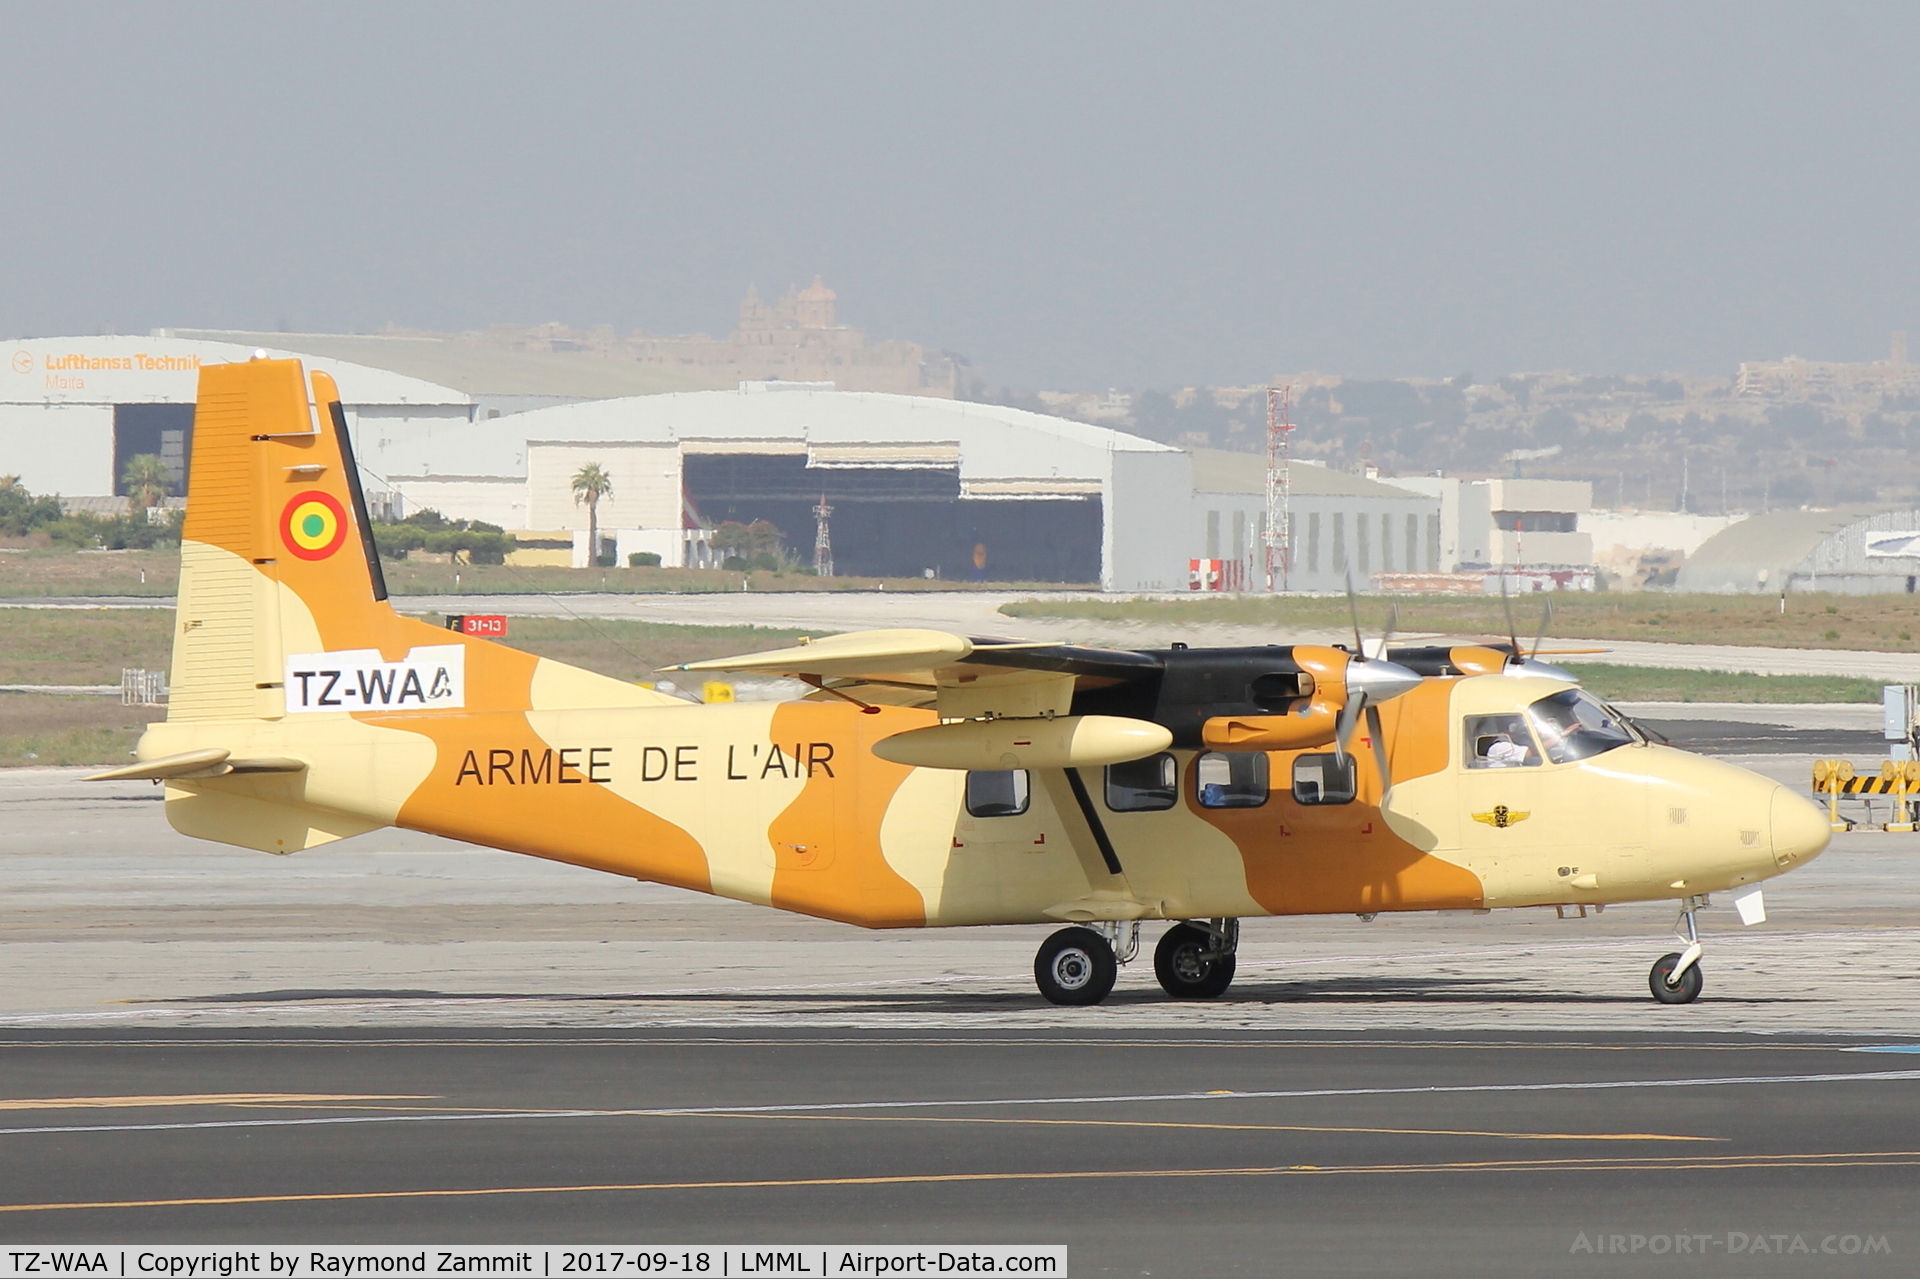 TZ-WAA, Harbin Y-12E C/N 093, Harbin Y-12E TZ-WAA passed through Malta on delivery to the Mali Air Force